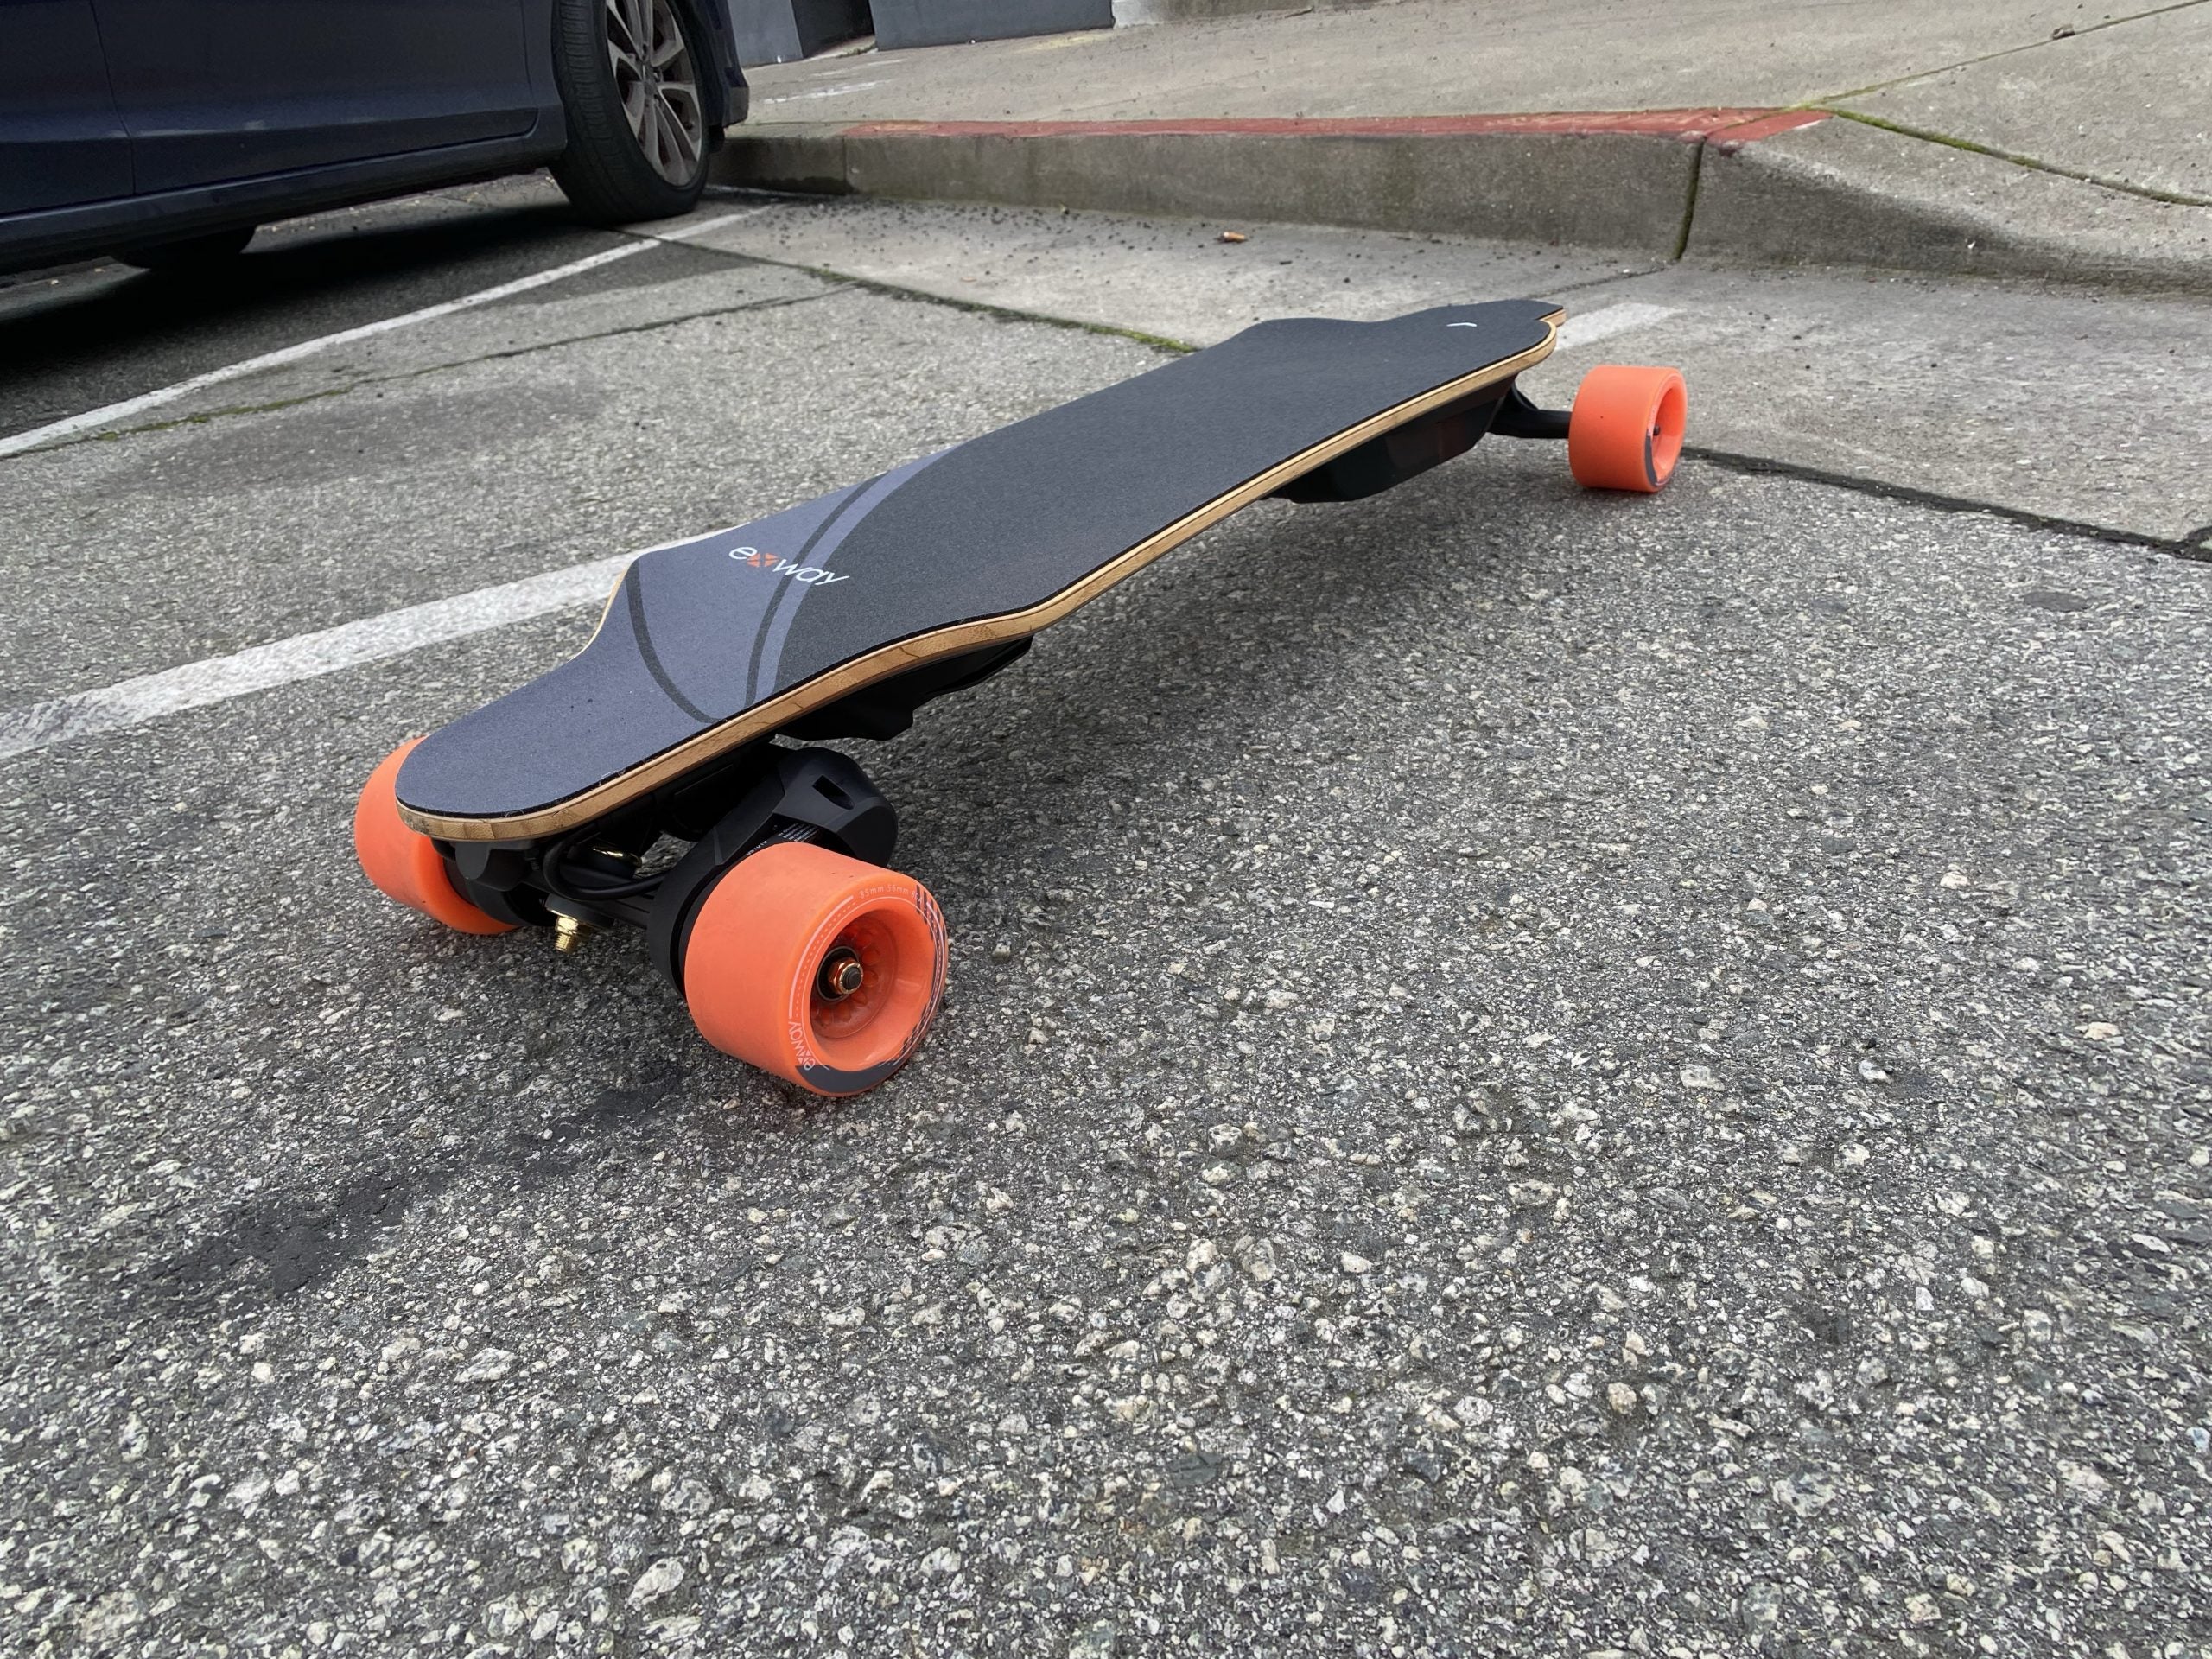 China 2000w 90 Small All Wheel Drive 2400 Hub Boosted Board For Adult  Longboard Skateboard Elettric From Valor2023, $2,002.65